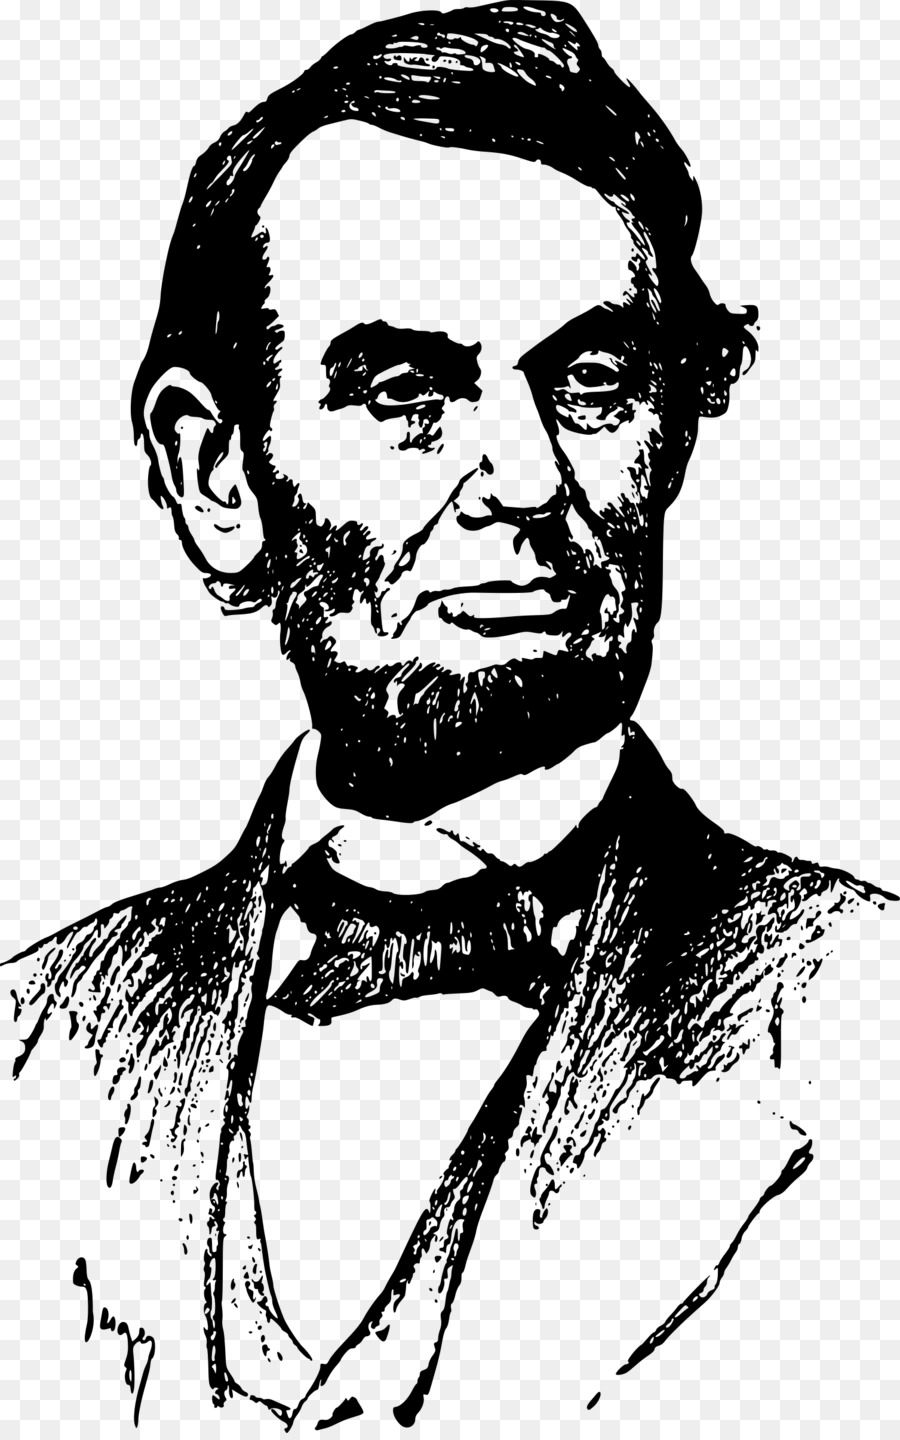 Abraham Lincoln Lincoln Memorial President of the United States Clip art - side profile png download - 1507*2400 - Free Transparent Abraham Lincoln png Download.